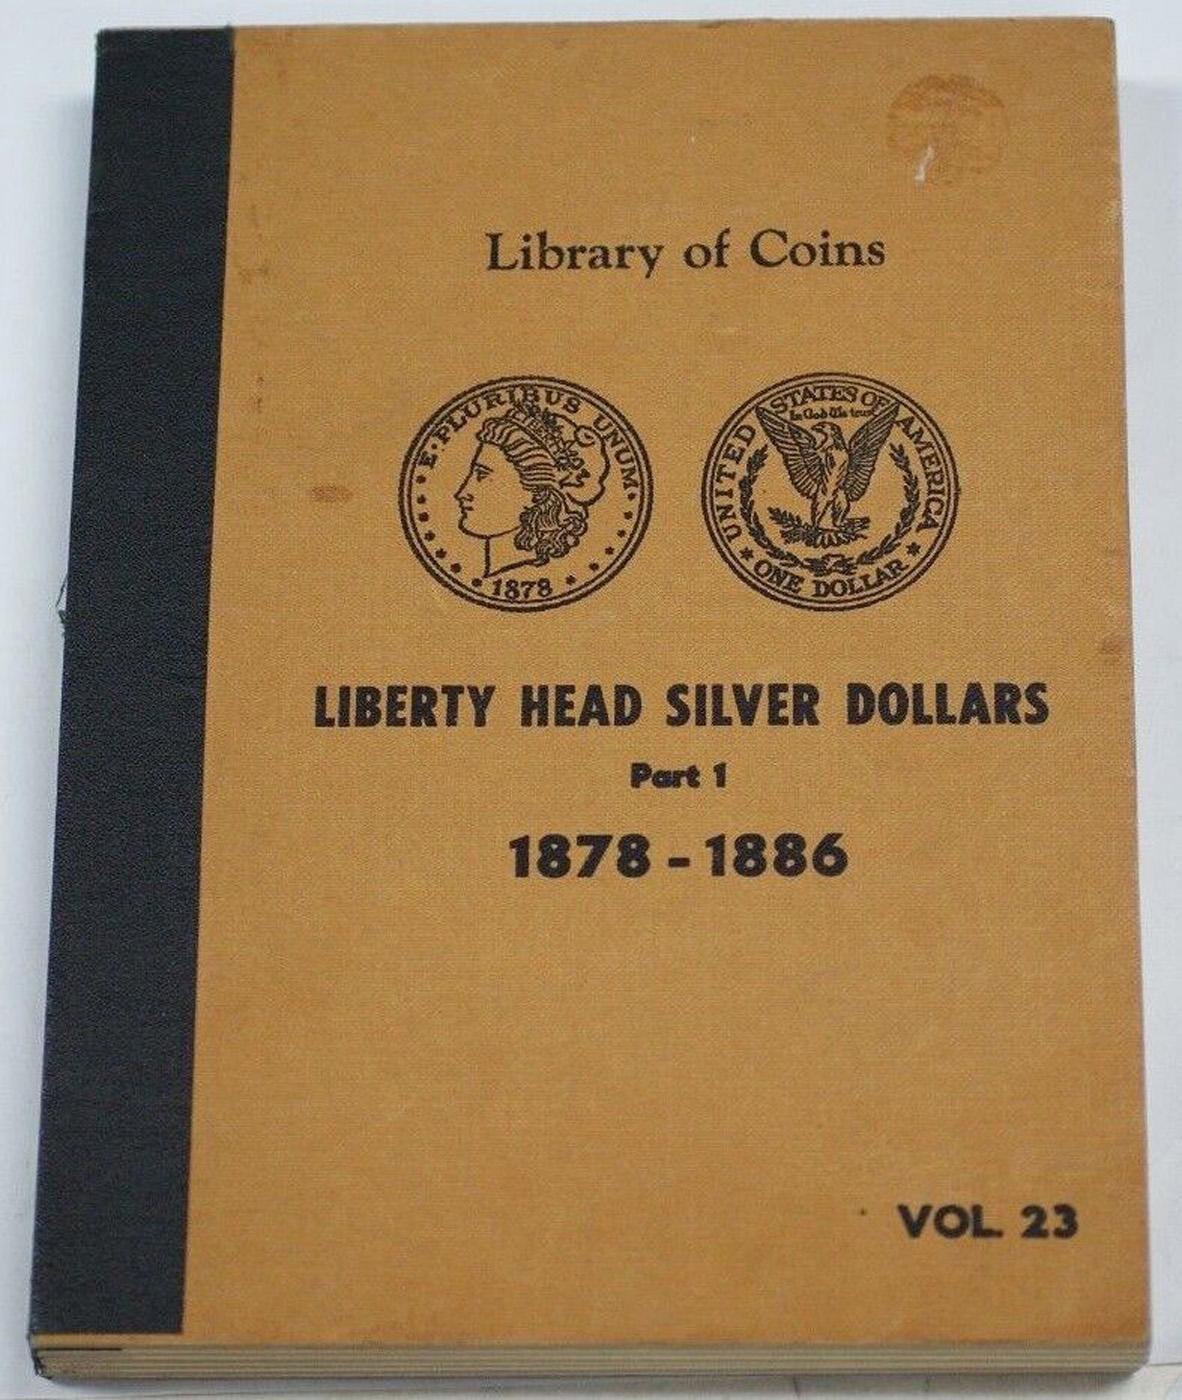 "Library of Coins" Collectors Book - No Coins - Liberty Head Silver $1 1878-1886 and 1897-1921